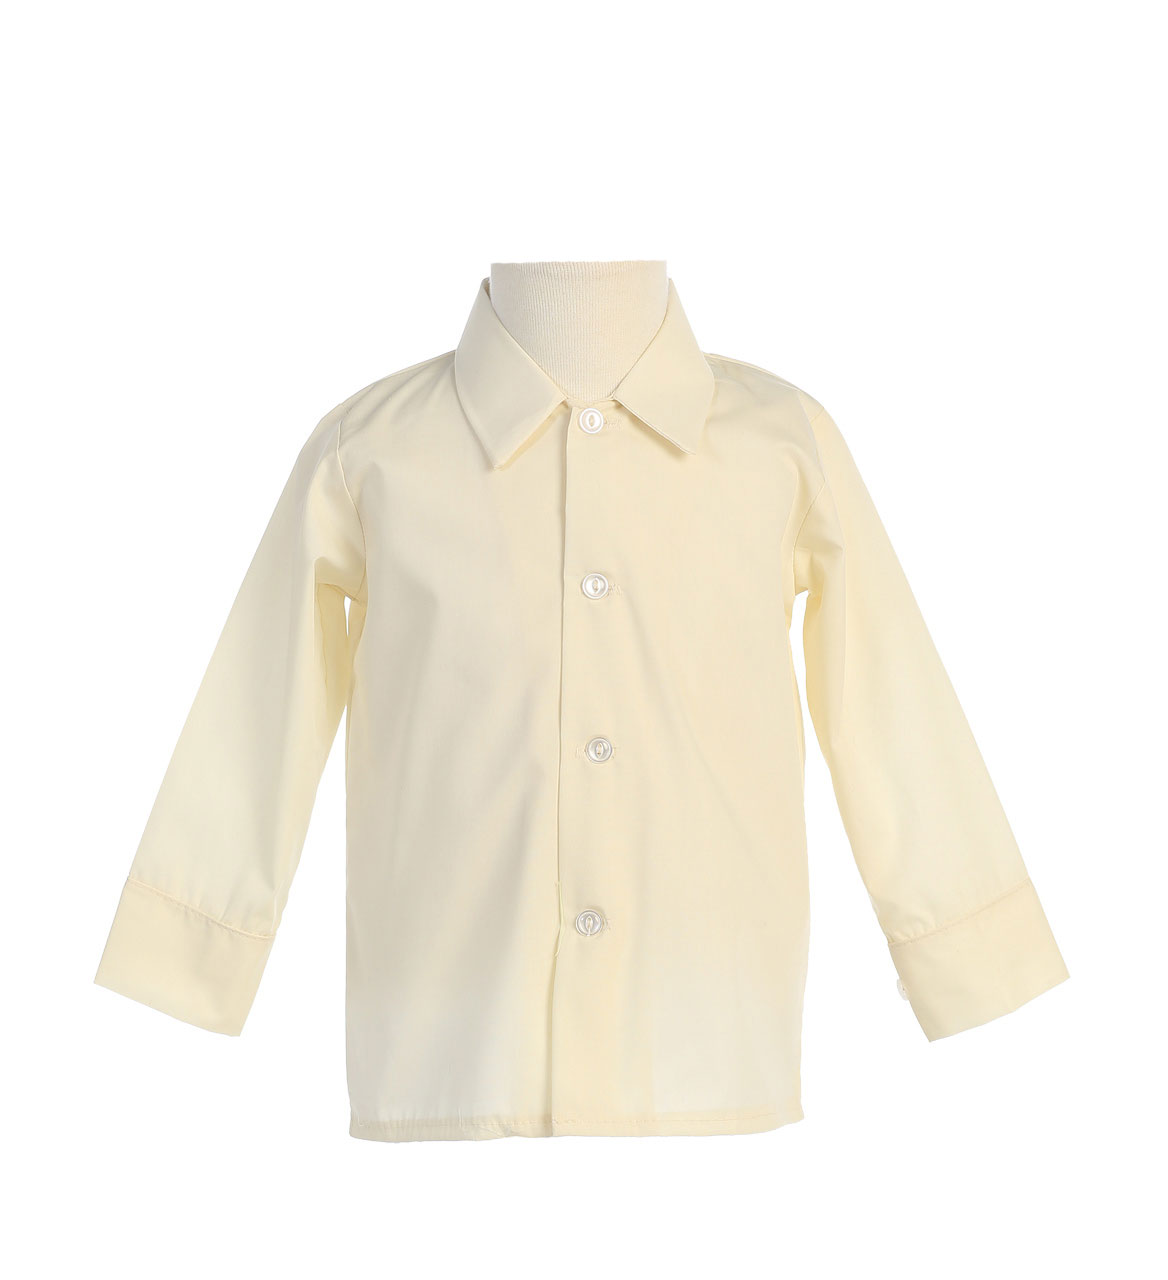 Boys Long Sleeved Simple Dress Shirt - Available in Ivory S